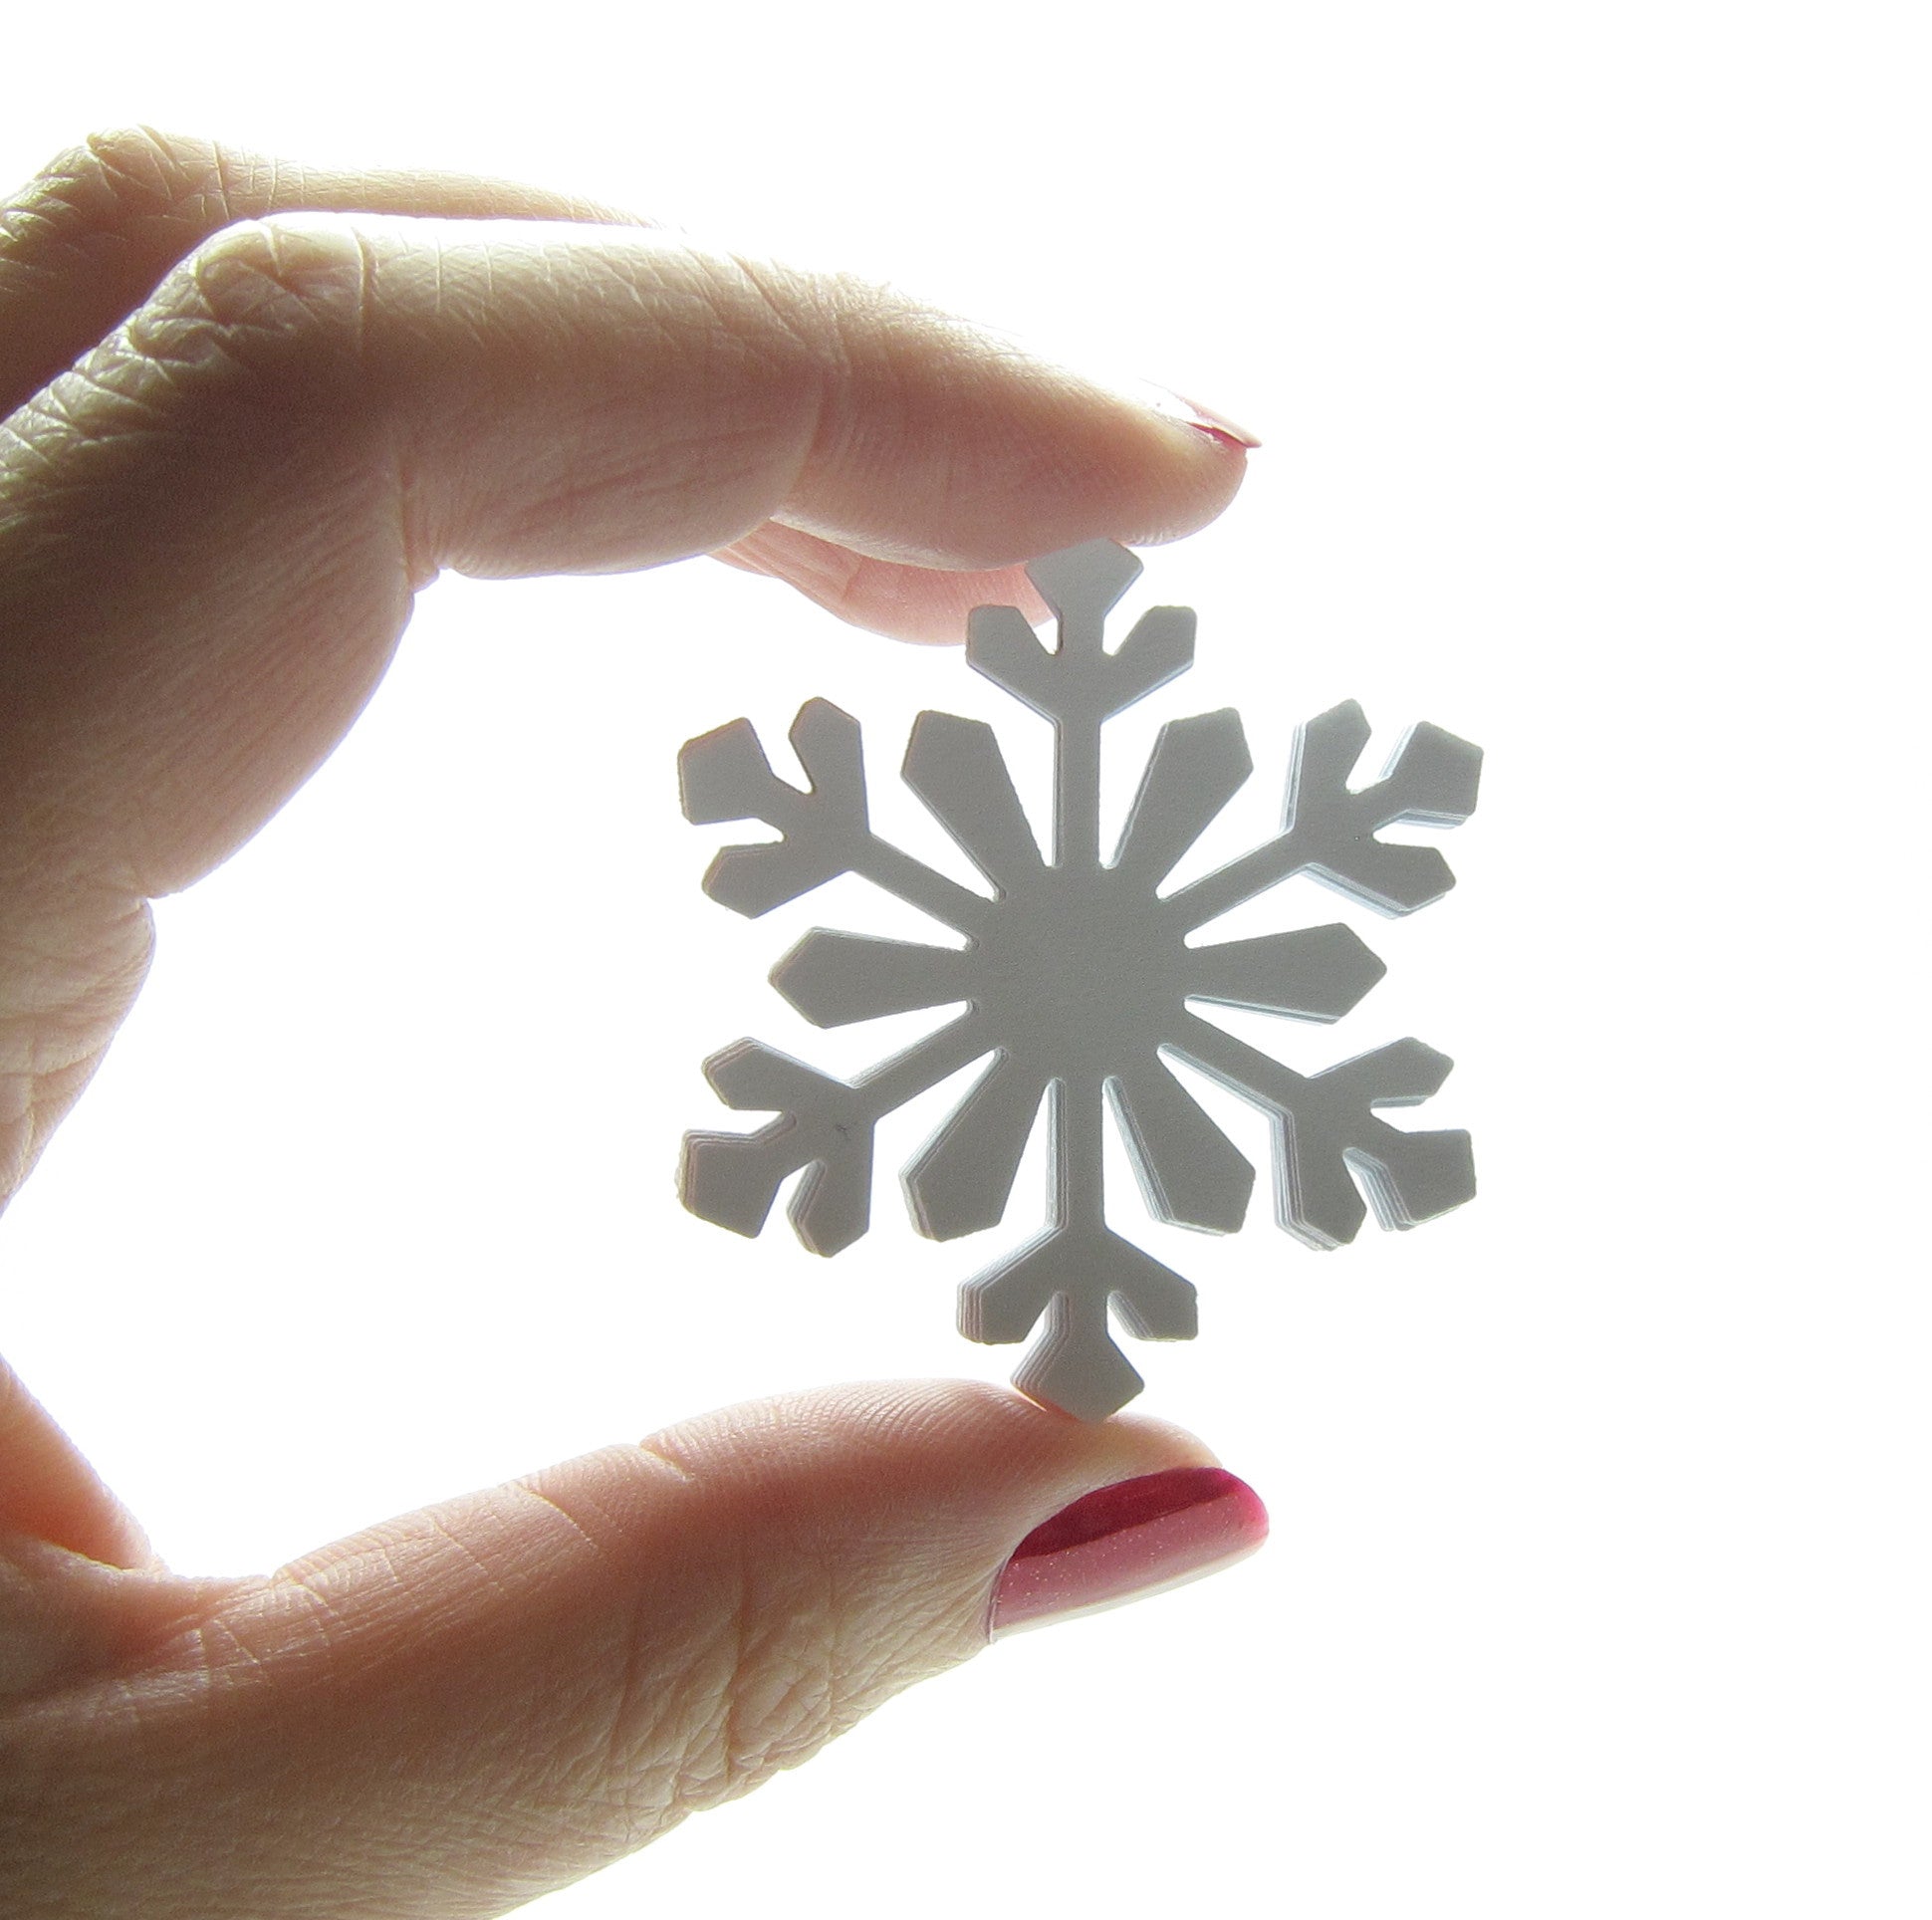 Extra large snowflake paper punches